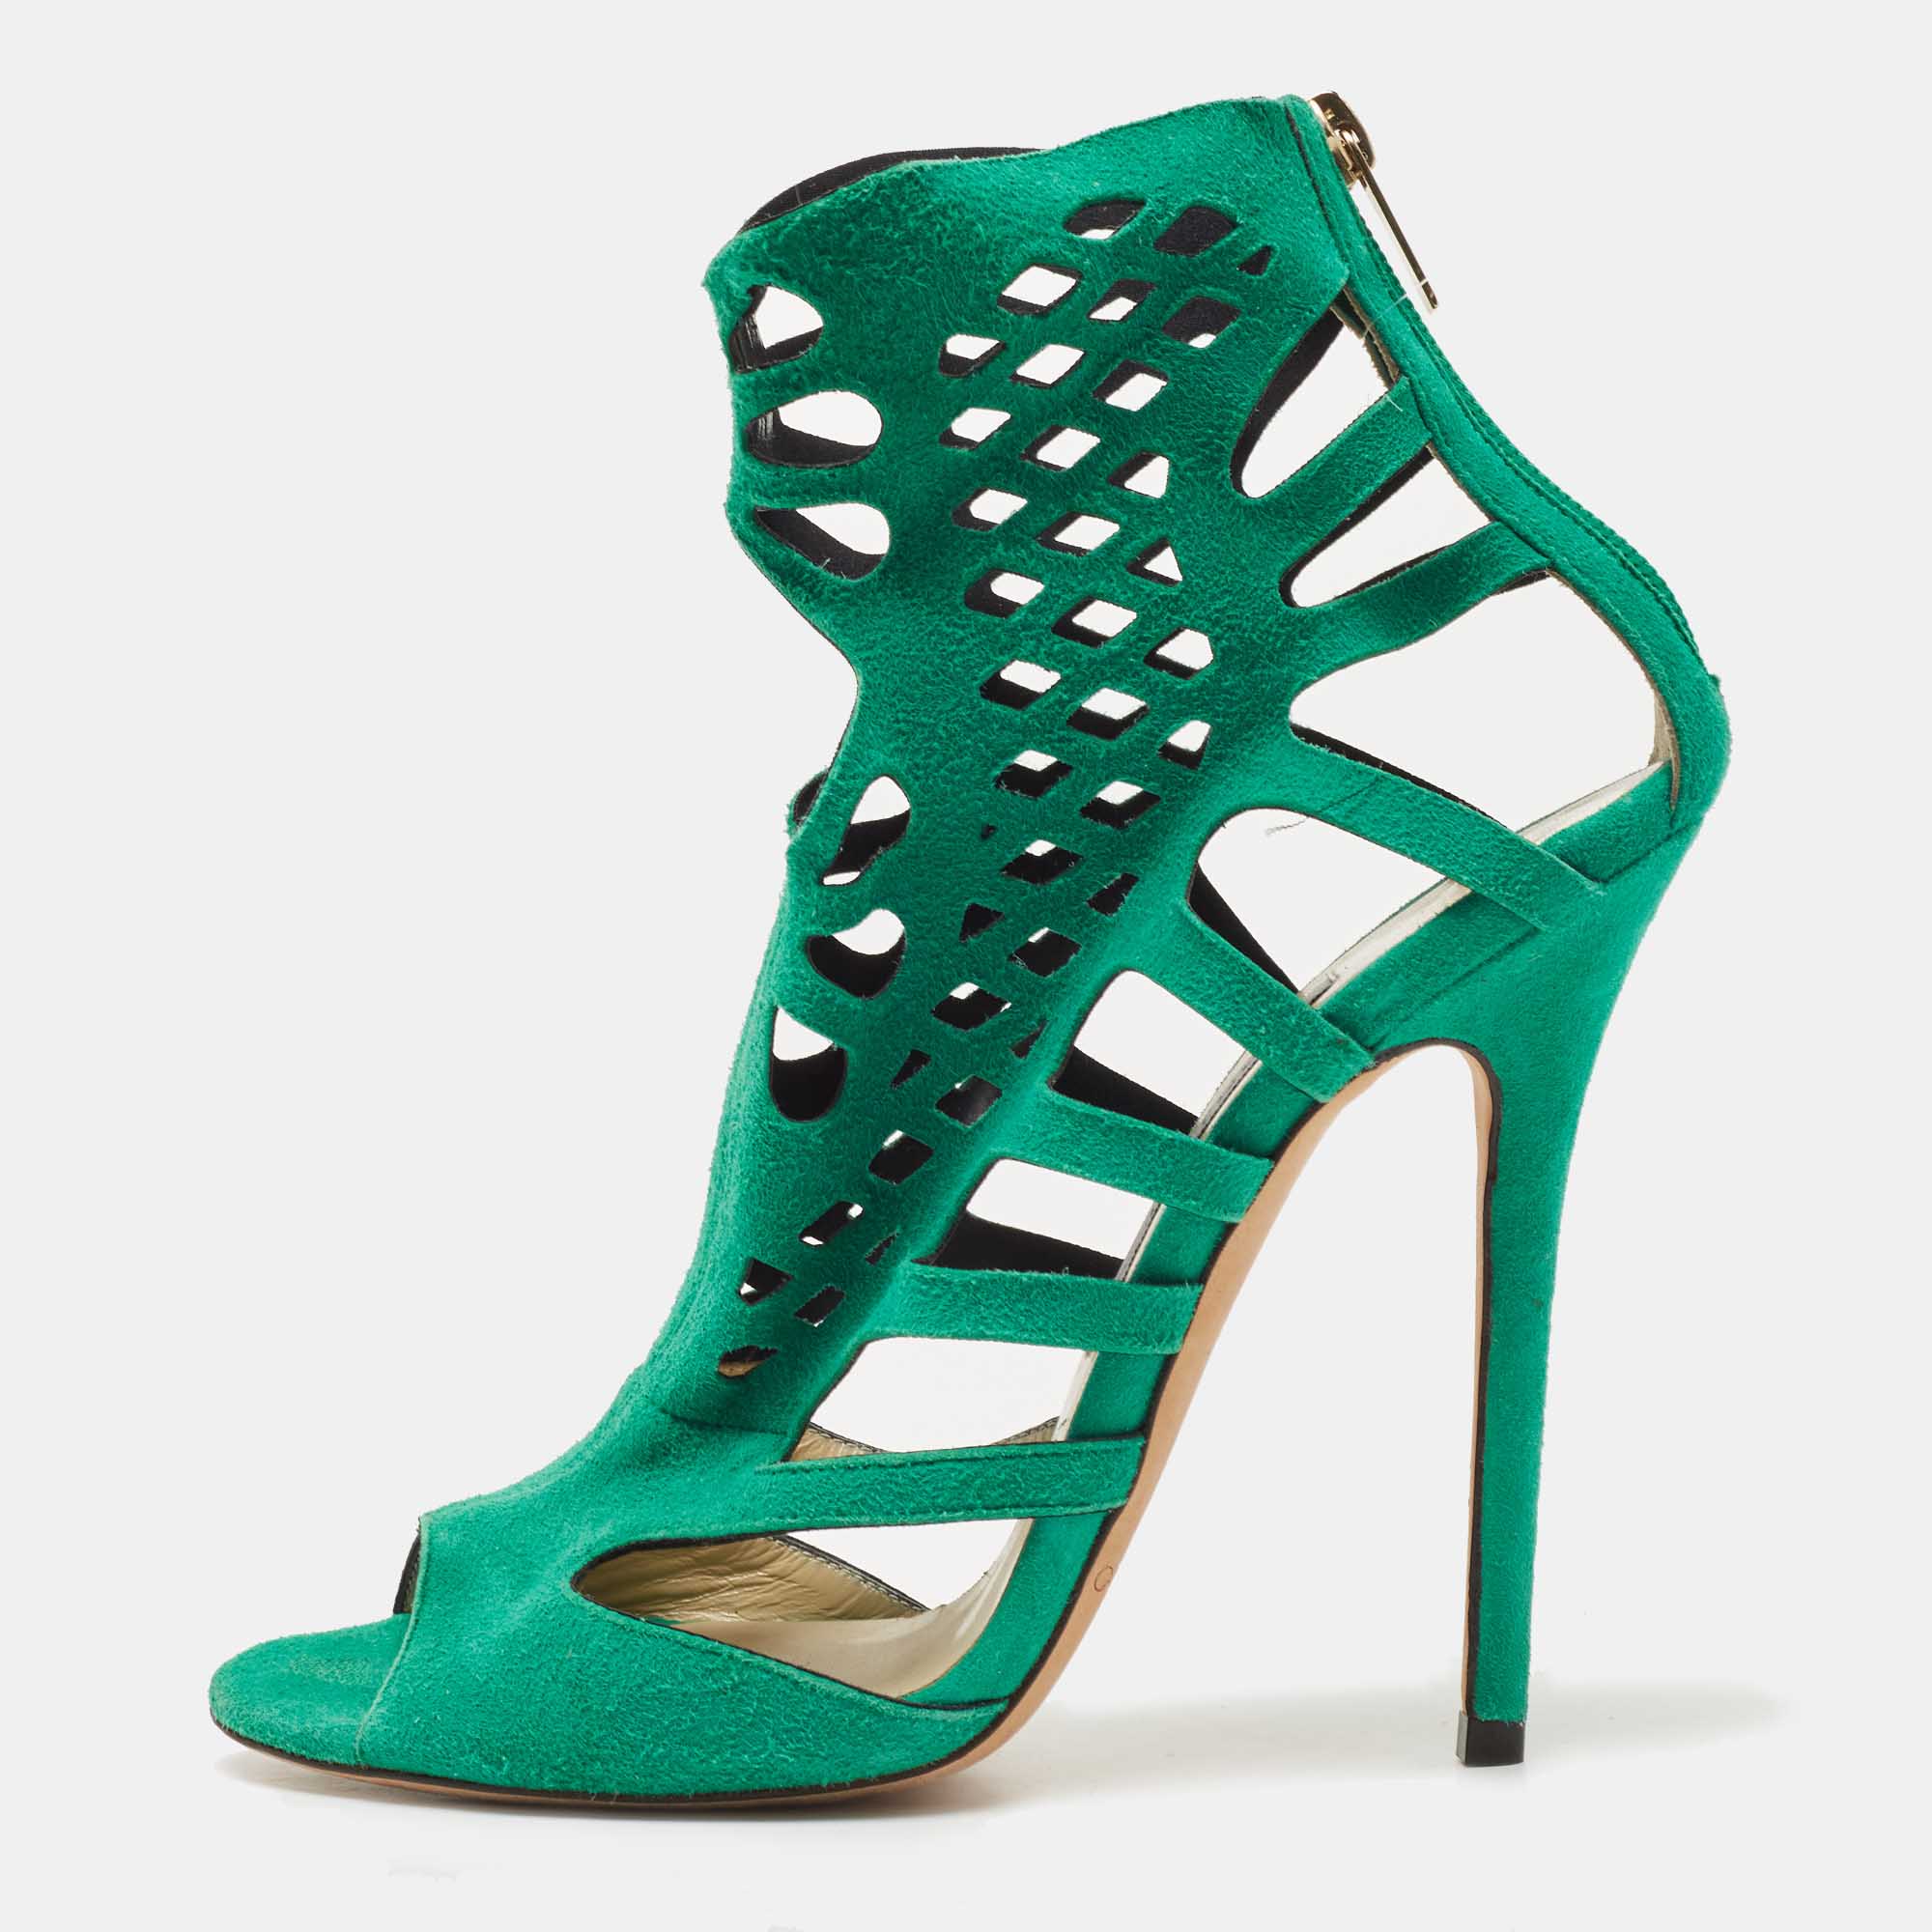 Pre-owned Jimmy Choo Green Suede Cut Out Sandals Size 38.5